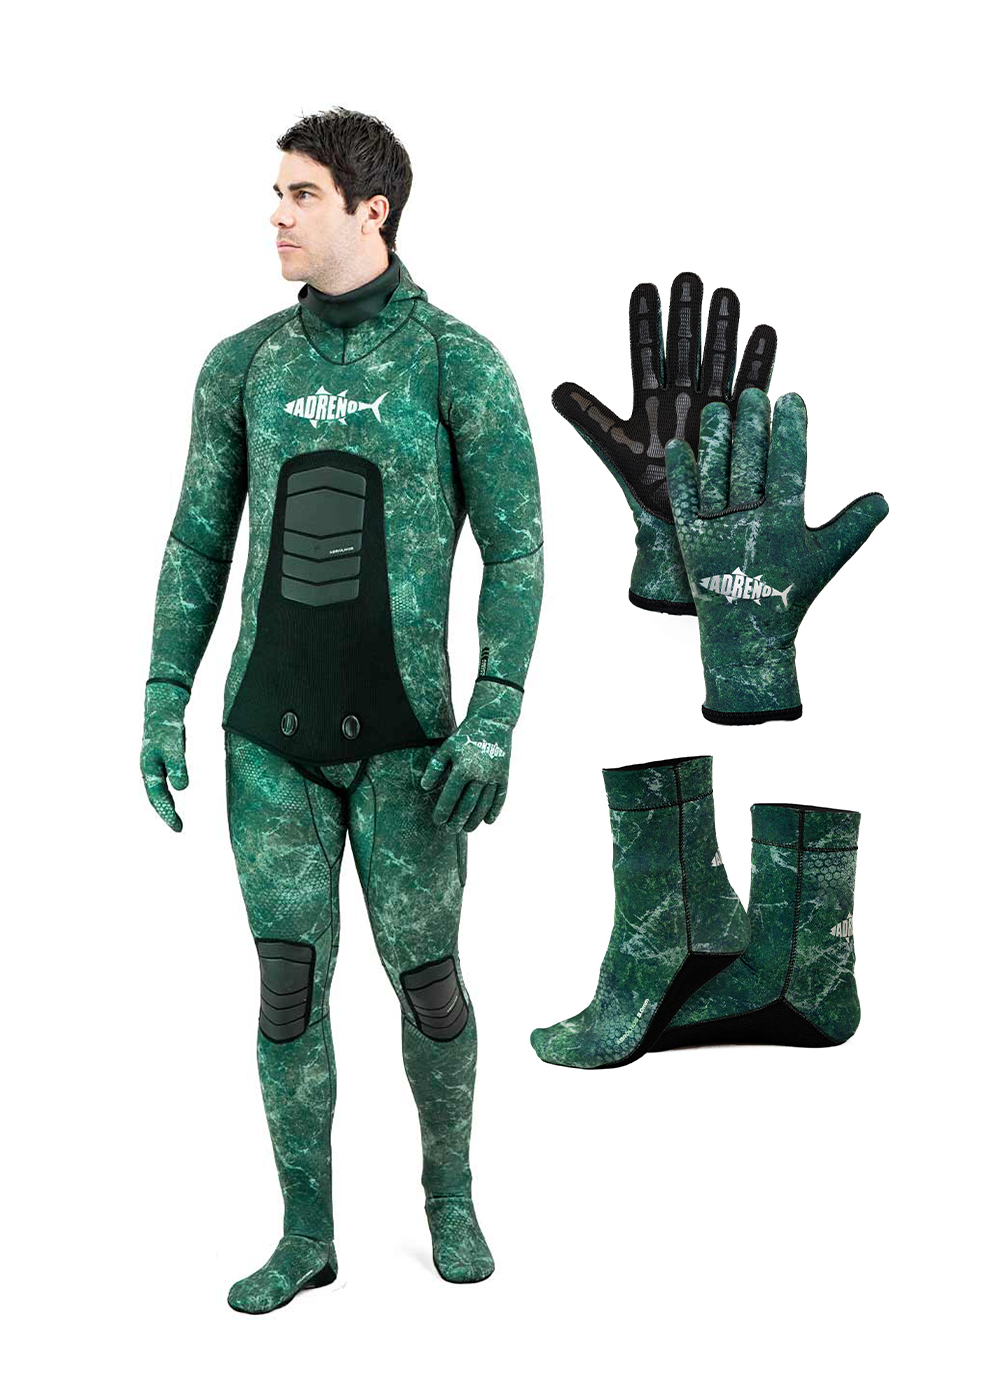 Adreno Mens Abrolhos 5.0mm Two Piece Wetsuit, Diving Gloves, Diving Socks - Package